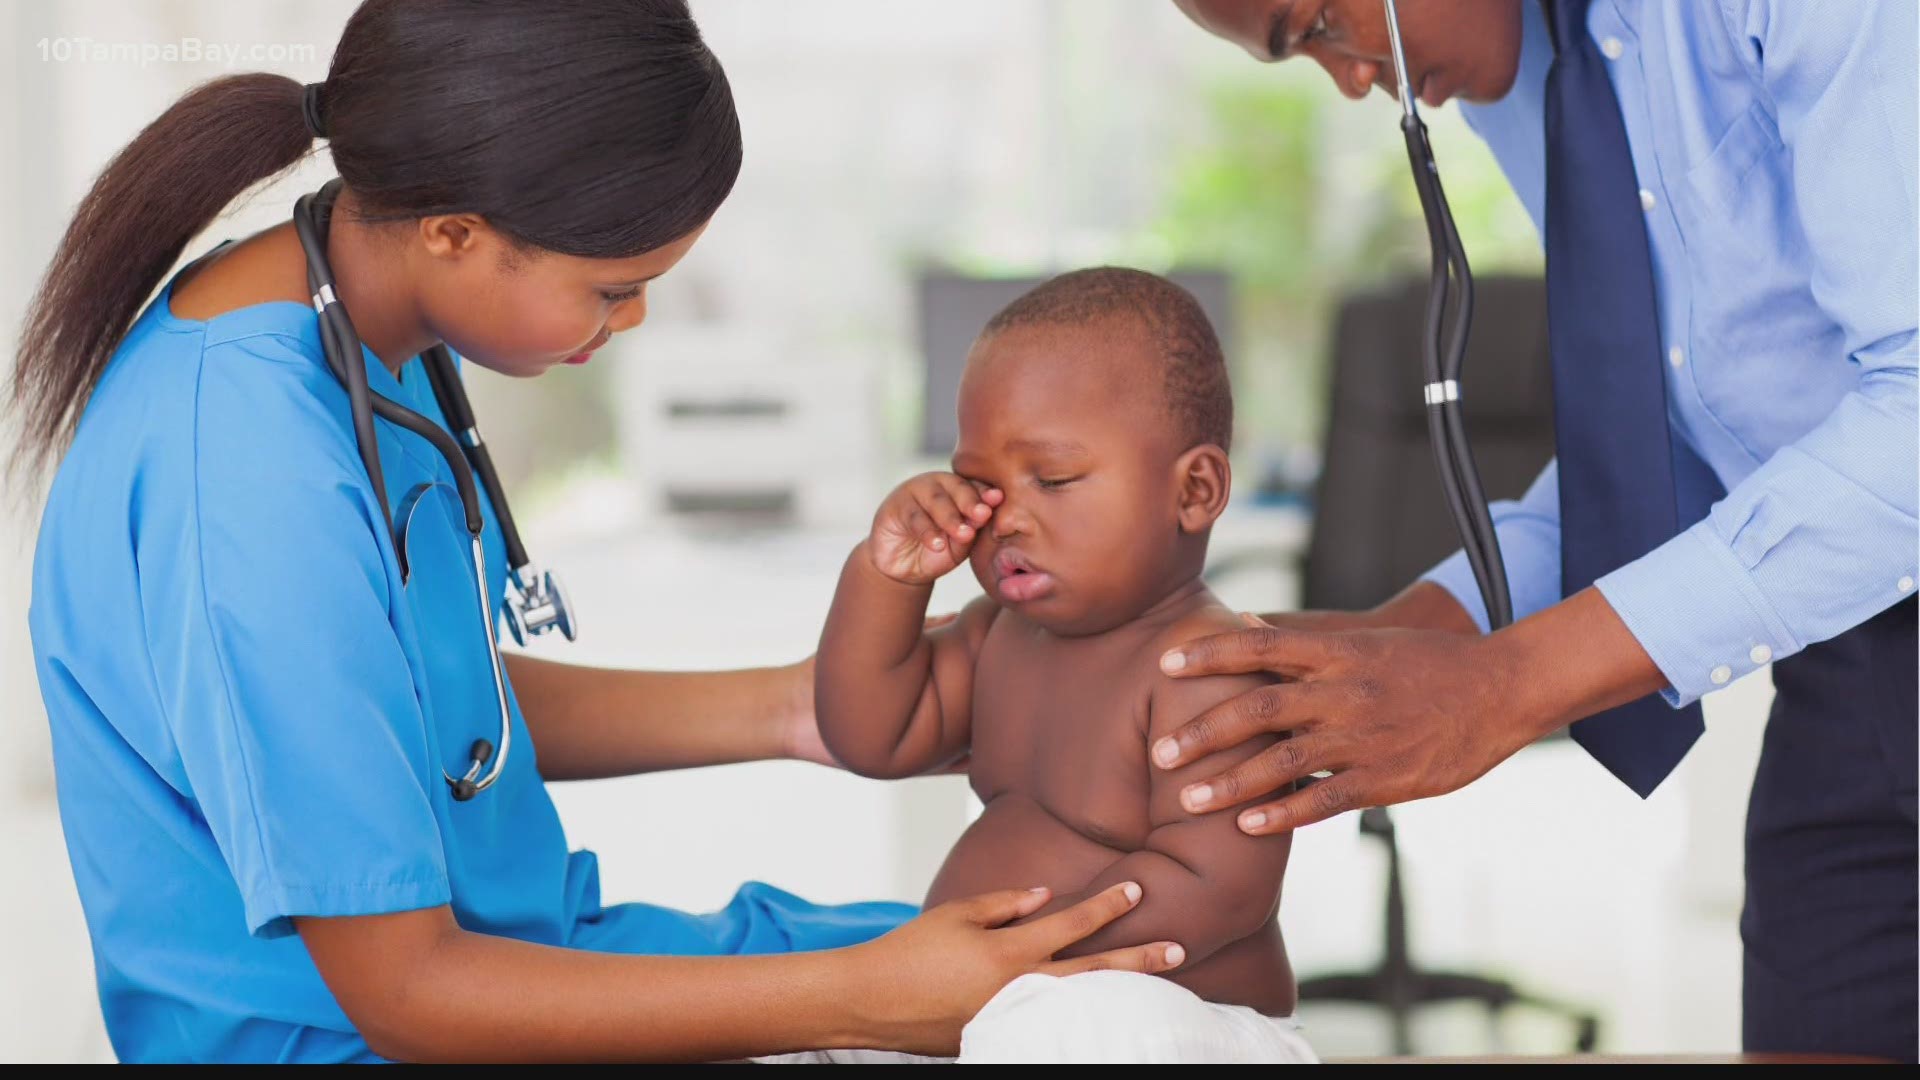 One Tampa hospital has been inundated with children sick with RSV and HPIV.